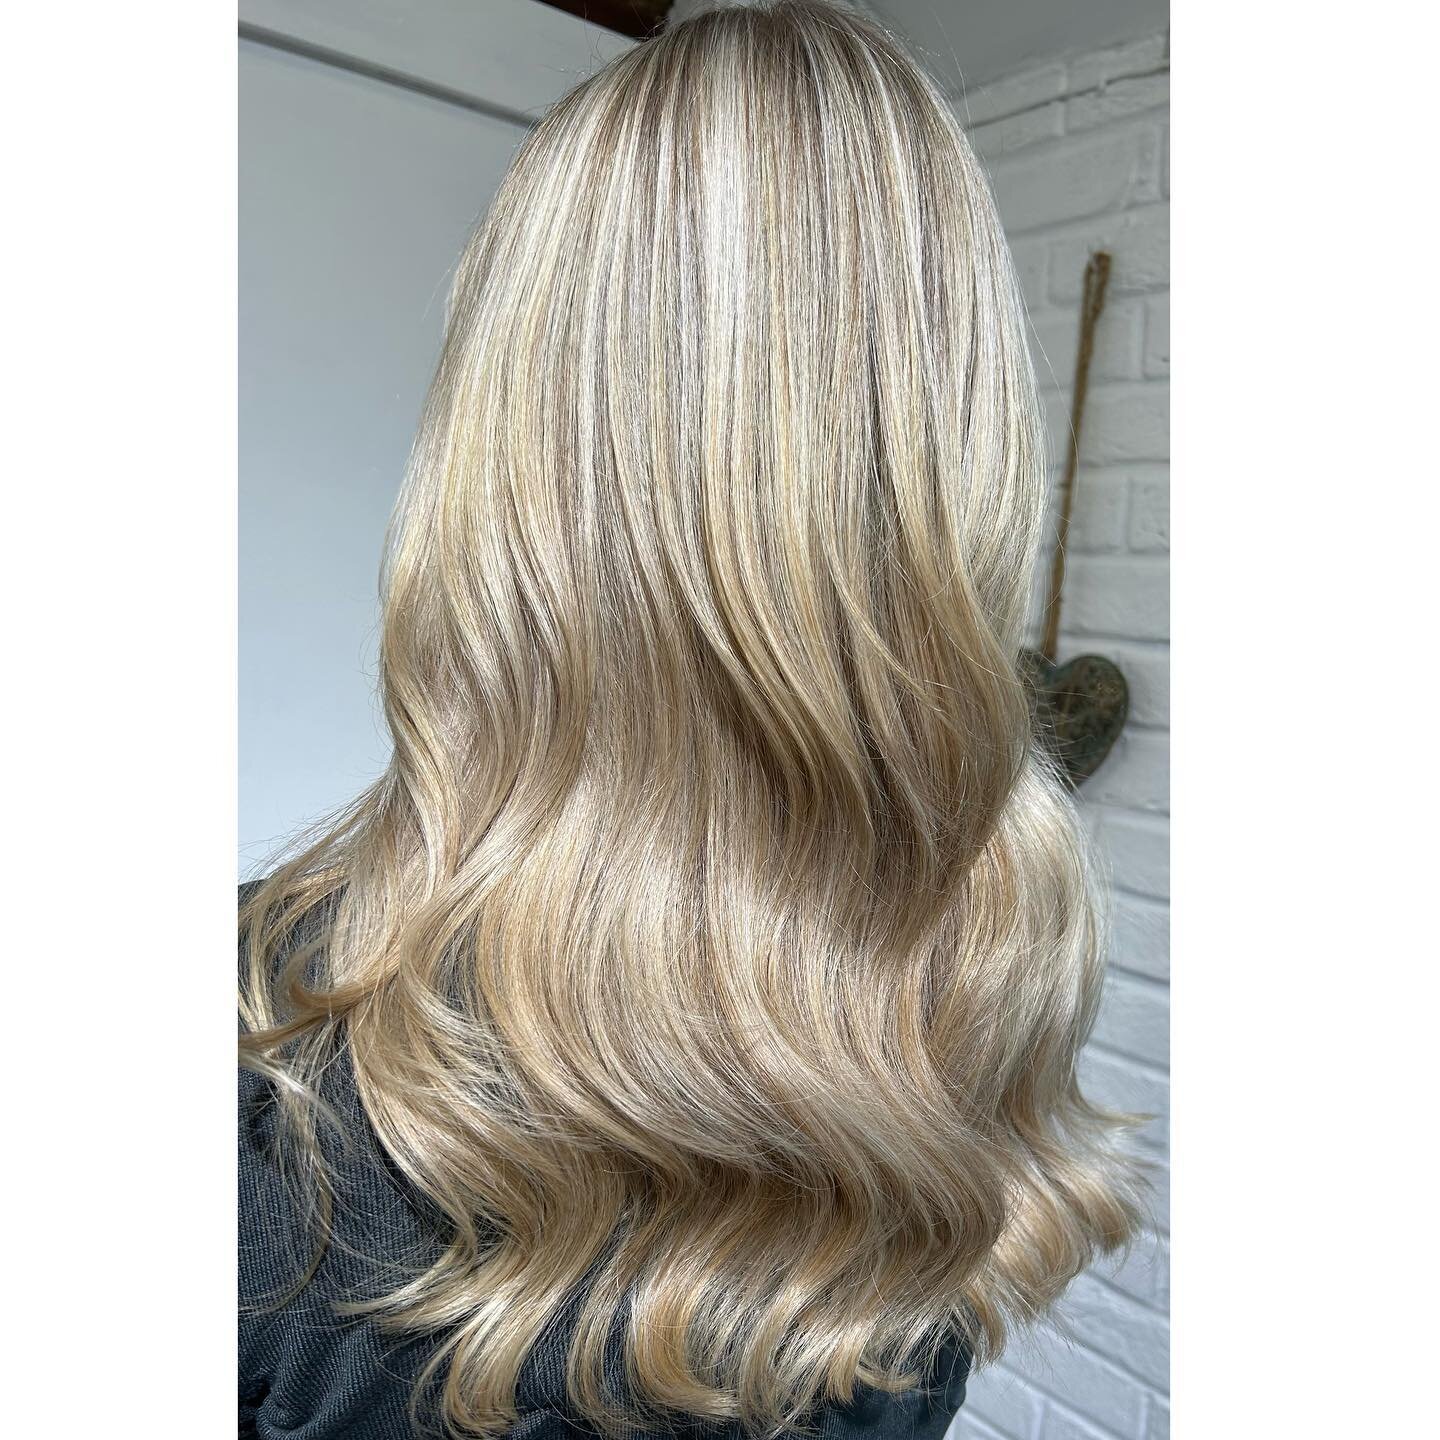 🙌🏻Happy bank holiday weekend! 🙌🏻The sun is shining, the farmers markets on what a fab way to start the weekend☀️ and no better way to celebrate with some summer blonde, brightening everything up and feeling fresh!☀️😍 #hair #hairdresser #hairsalo